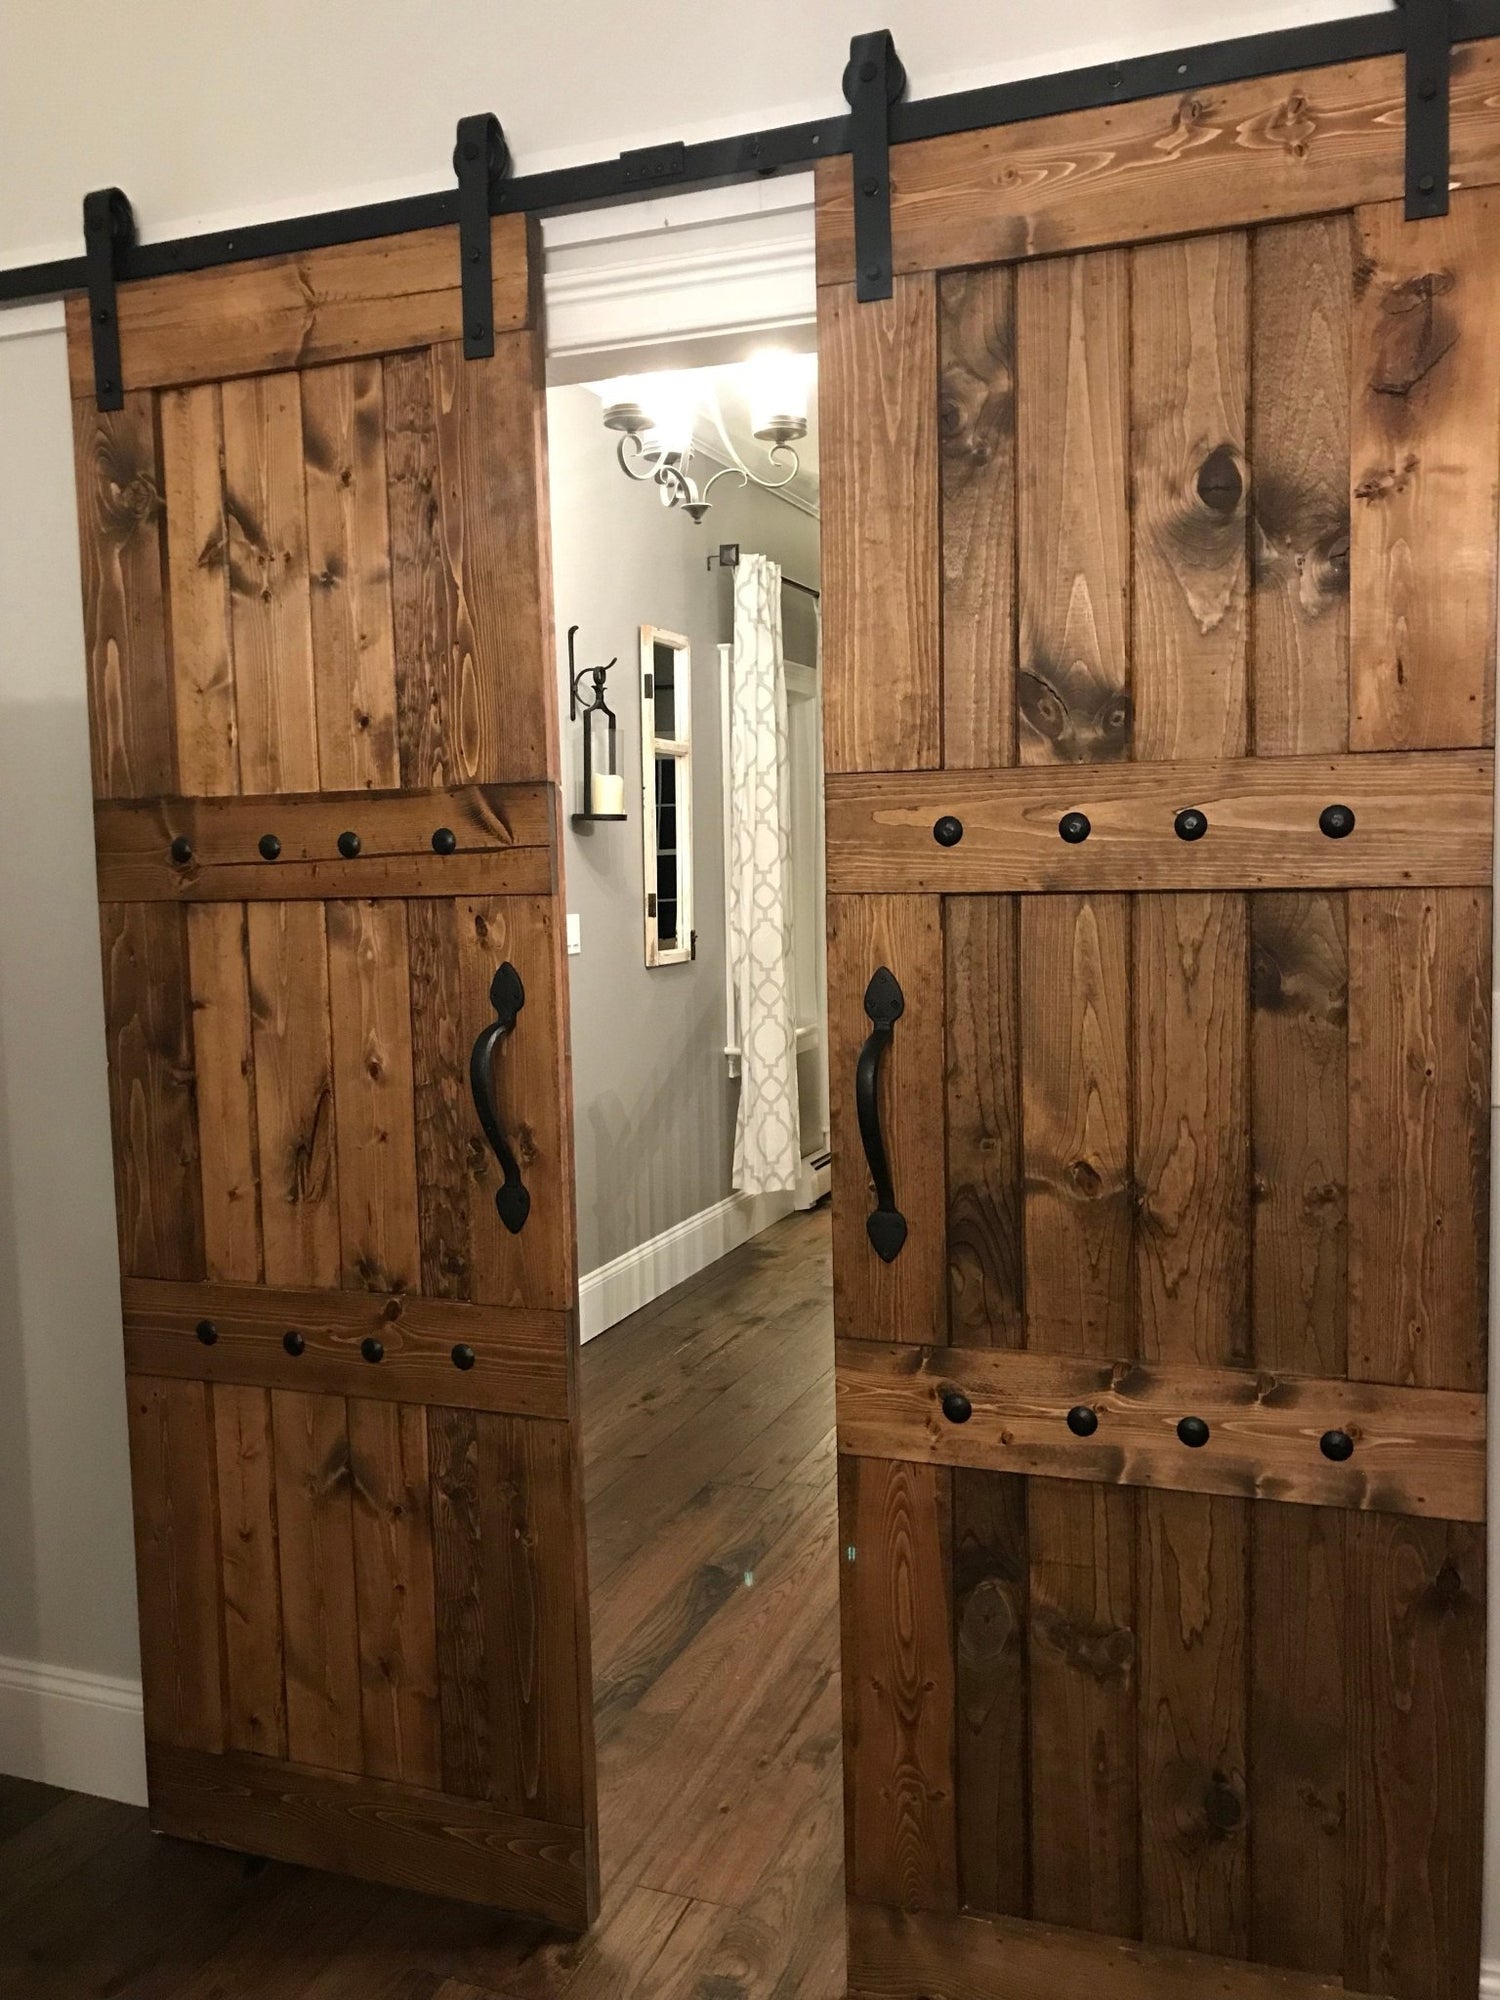 Pair of wooden barn doors equipped with black Customized Barn Sliding Hardware